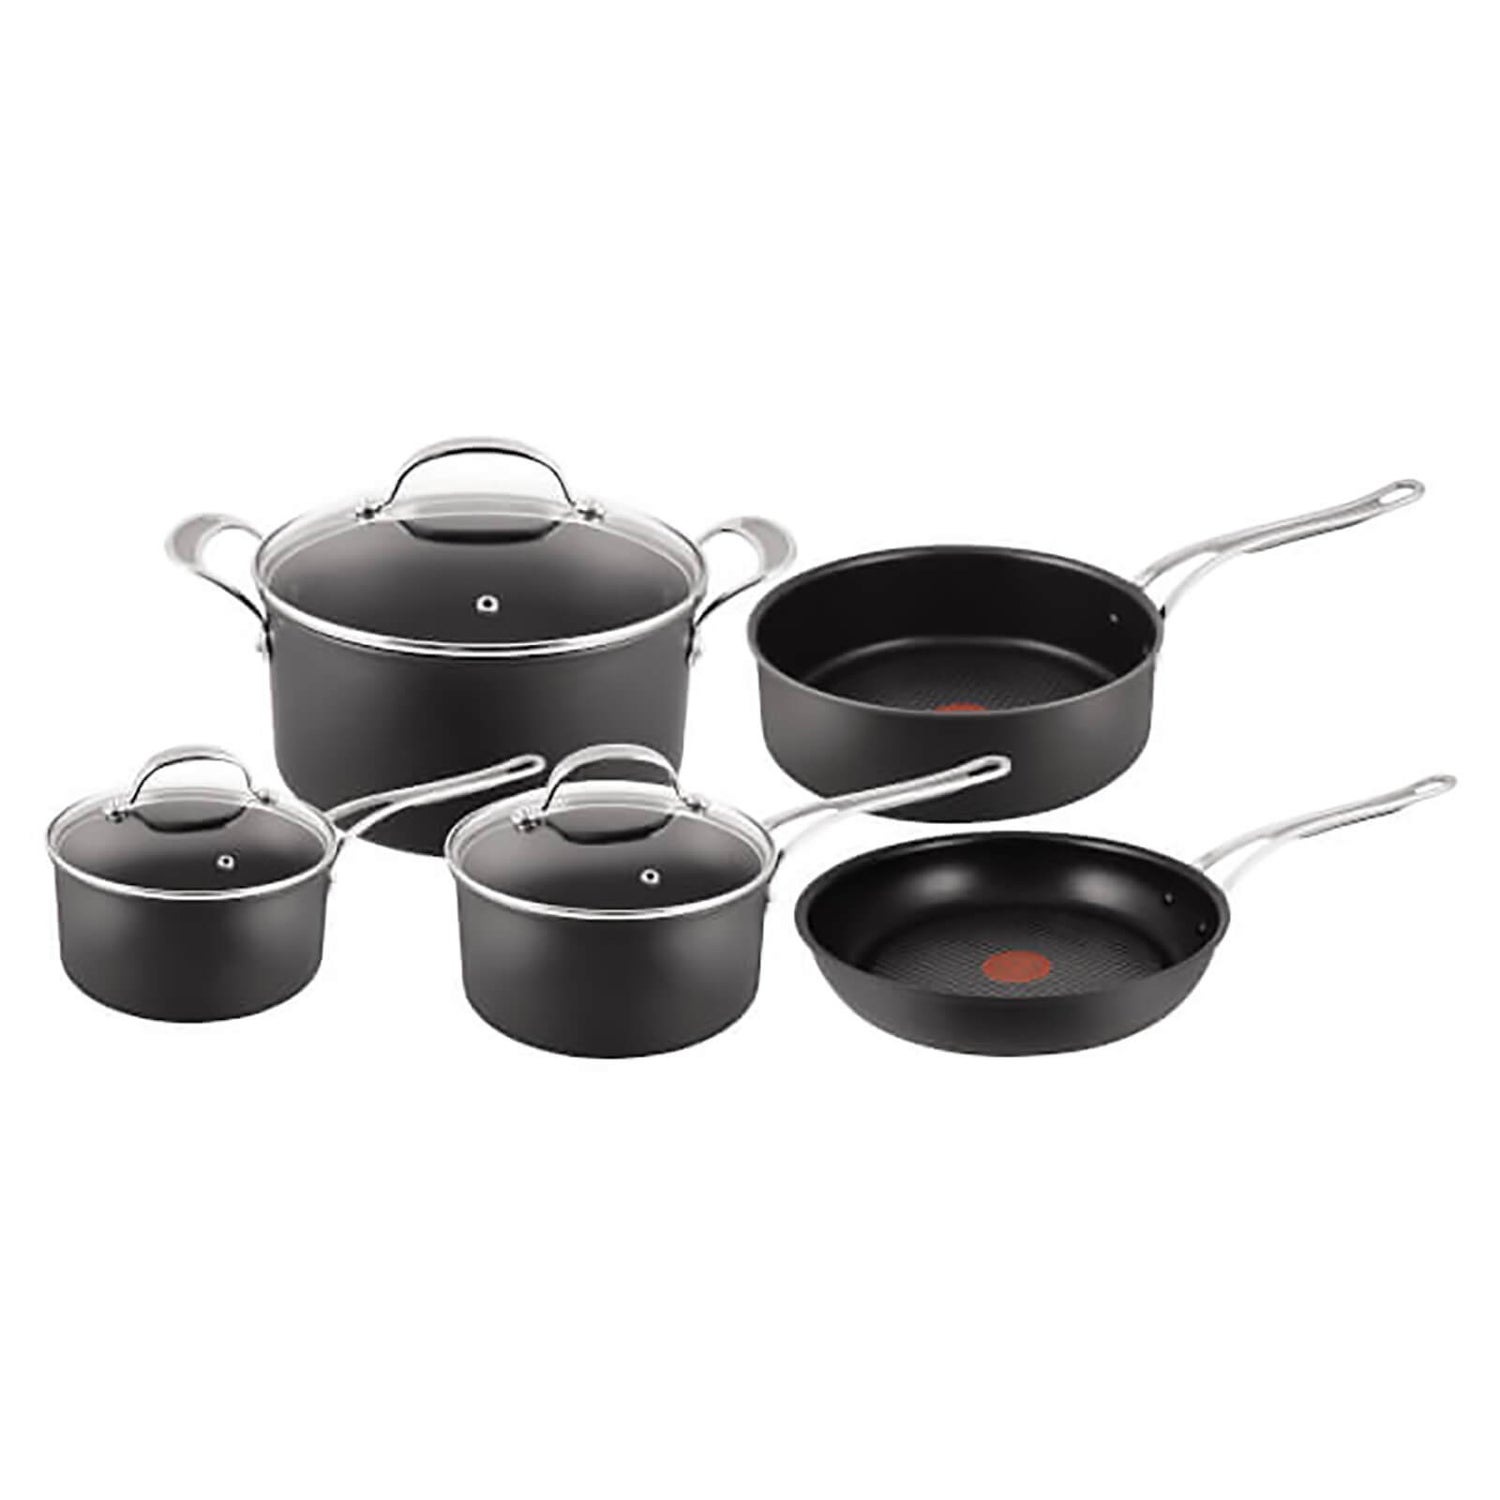 Jamie Oliver by Tefal Hard Anodised Non-Stick 5 Piece Cookware Set Homeware  - Zavvi US